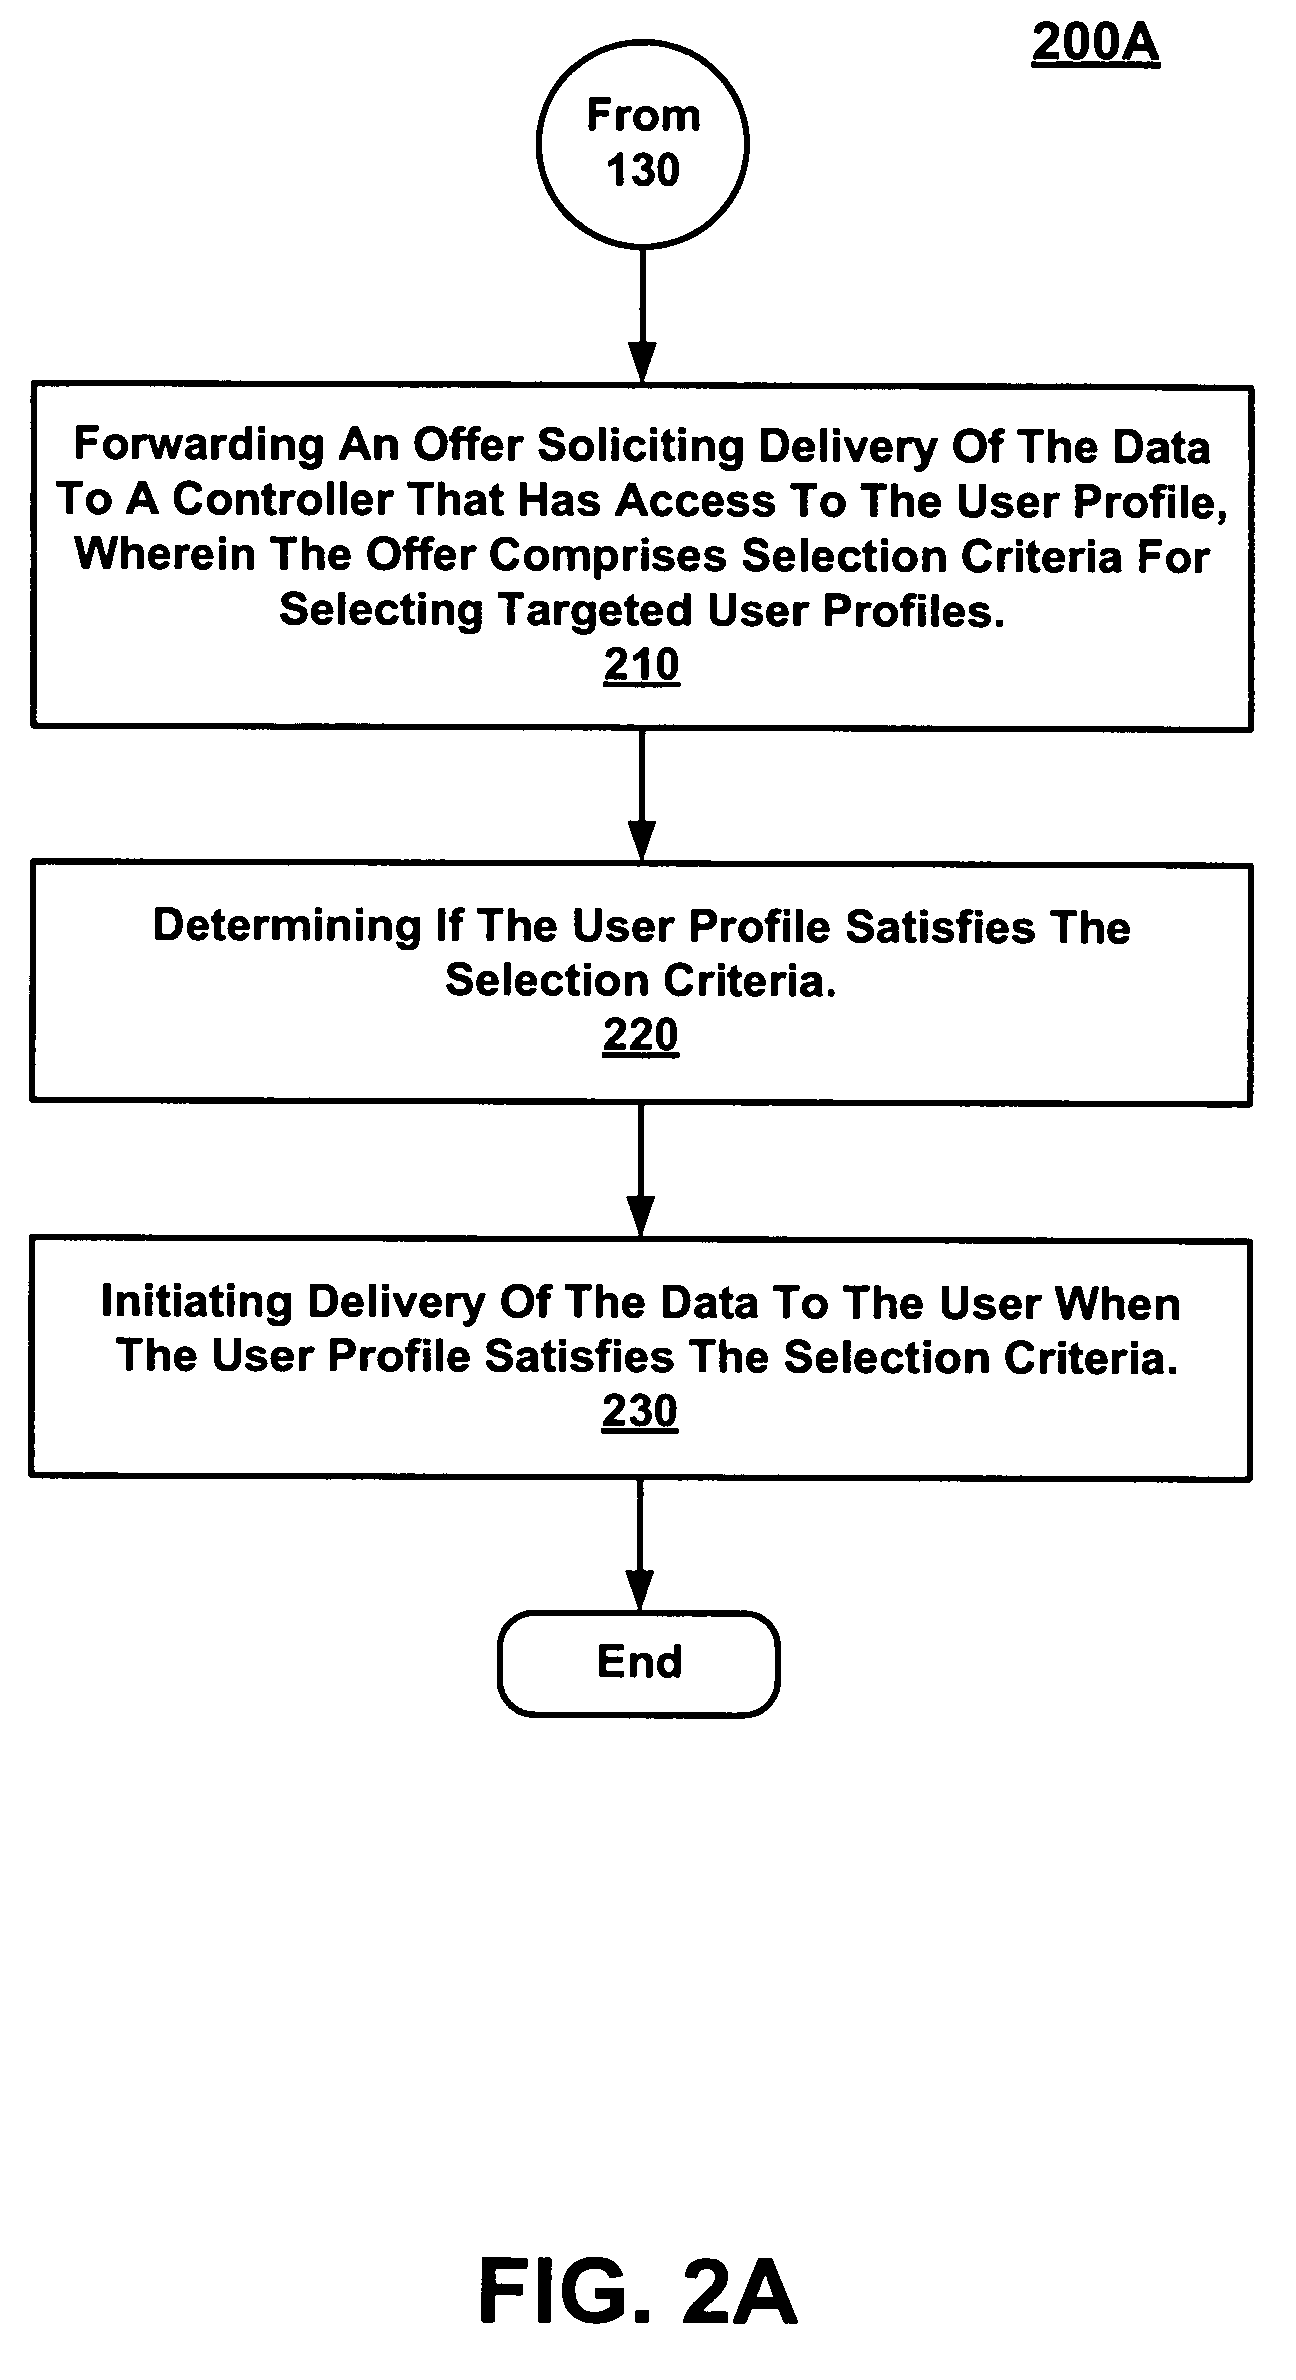 Proving that a user profile satisfies selection criteria for targeted data delivery